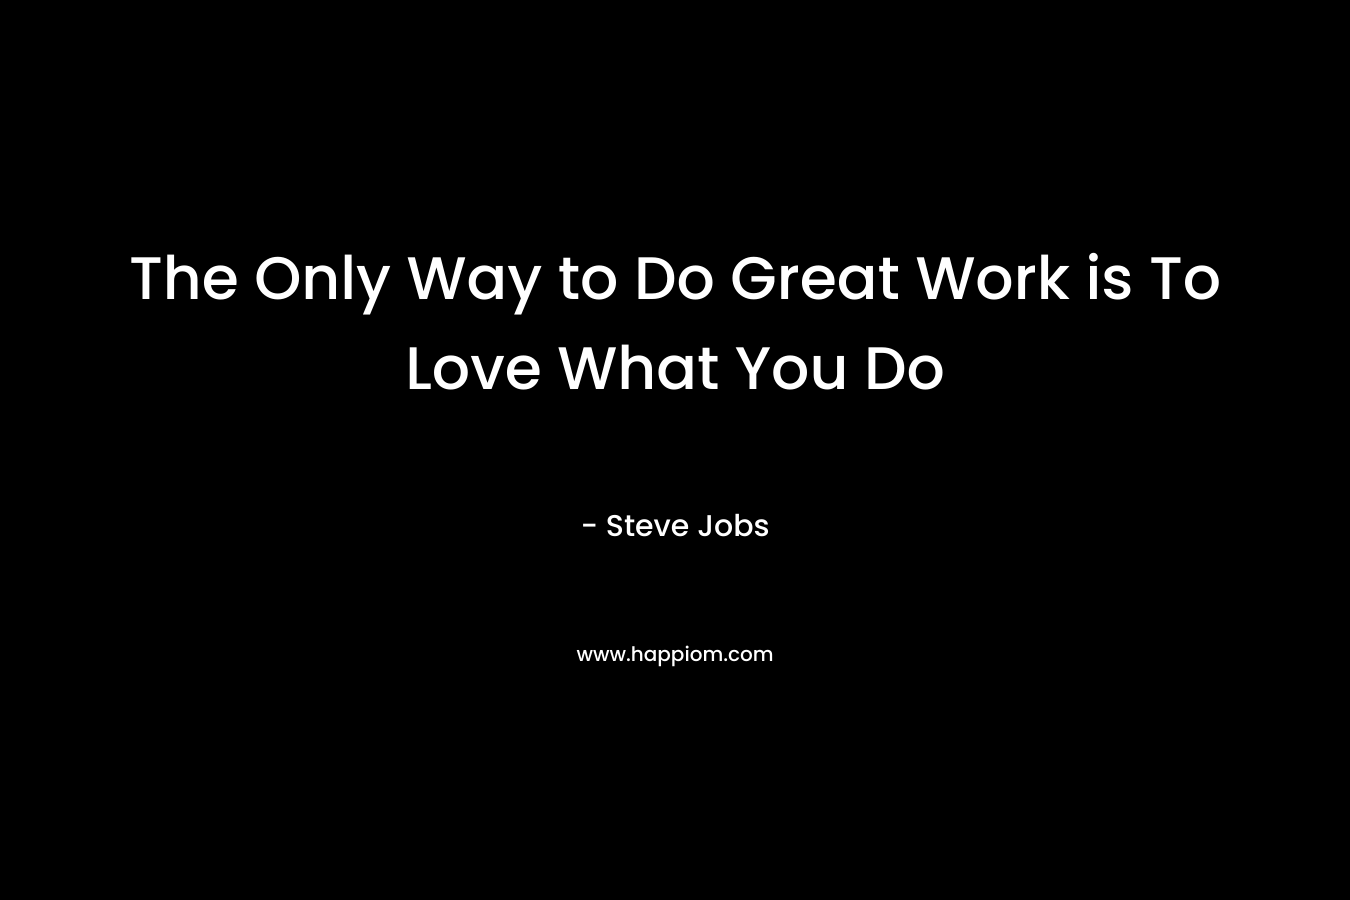 The Only Way to Do Great Work is To Love What You Do